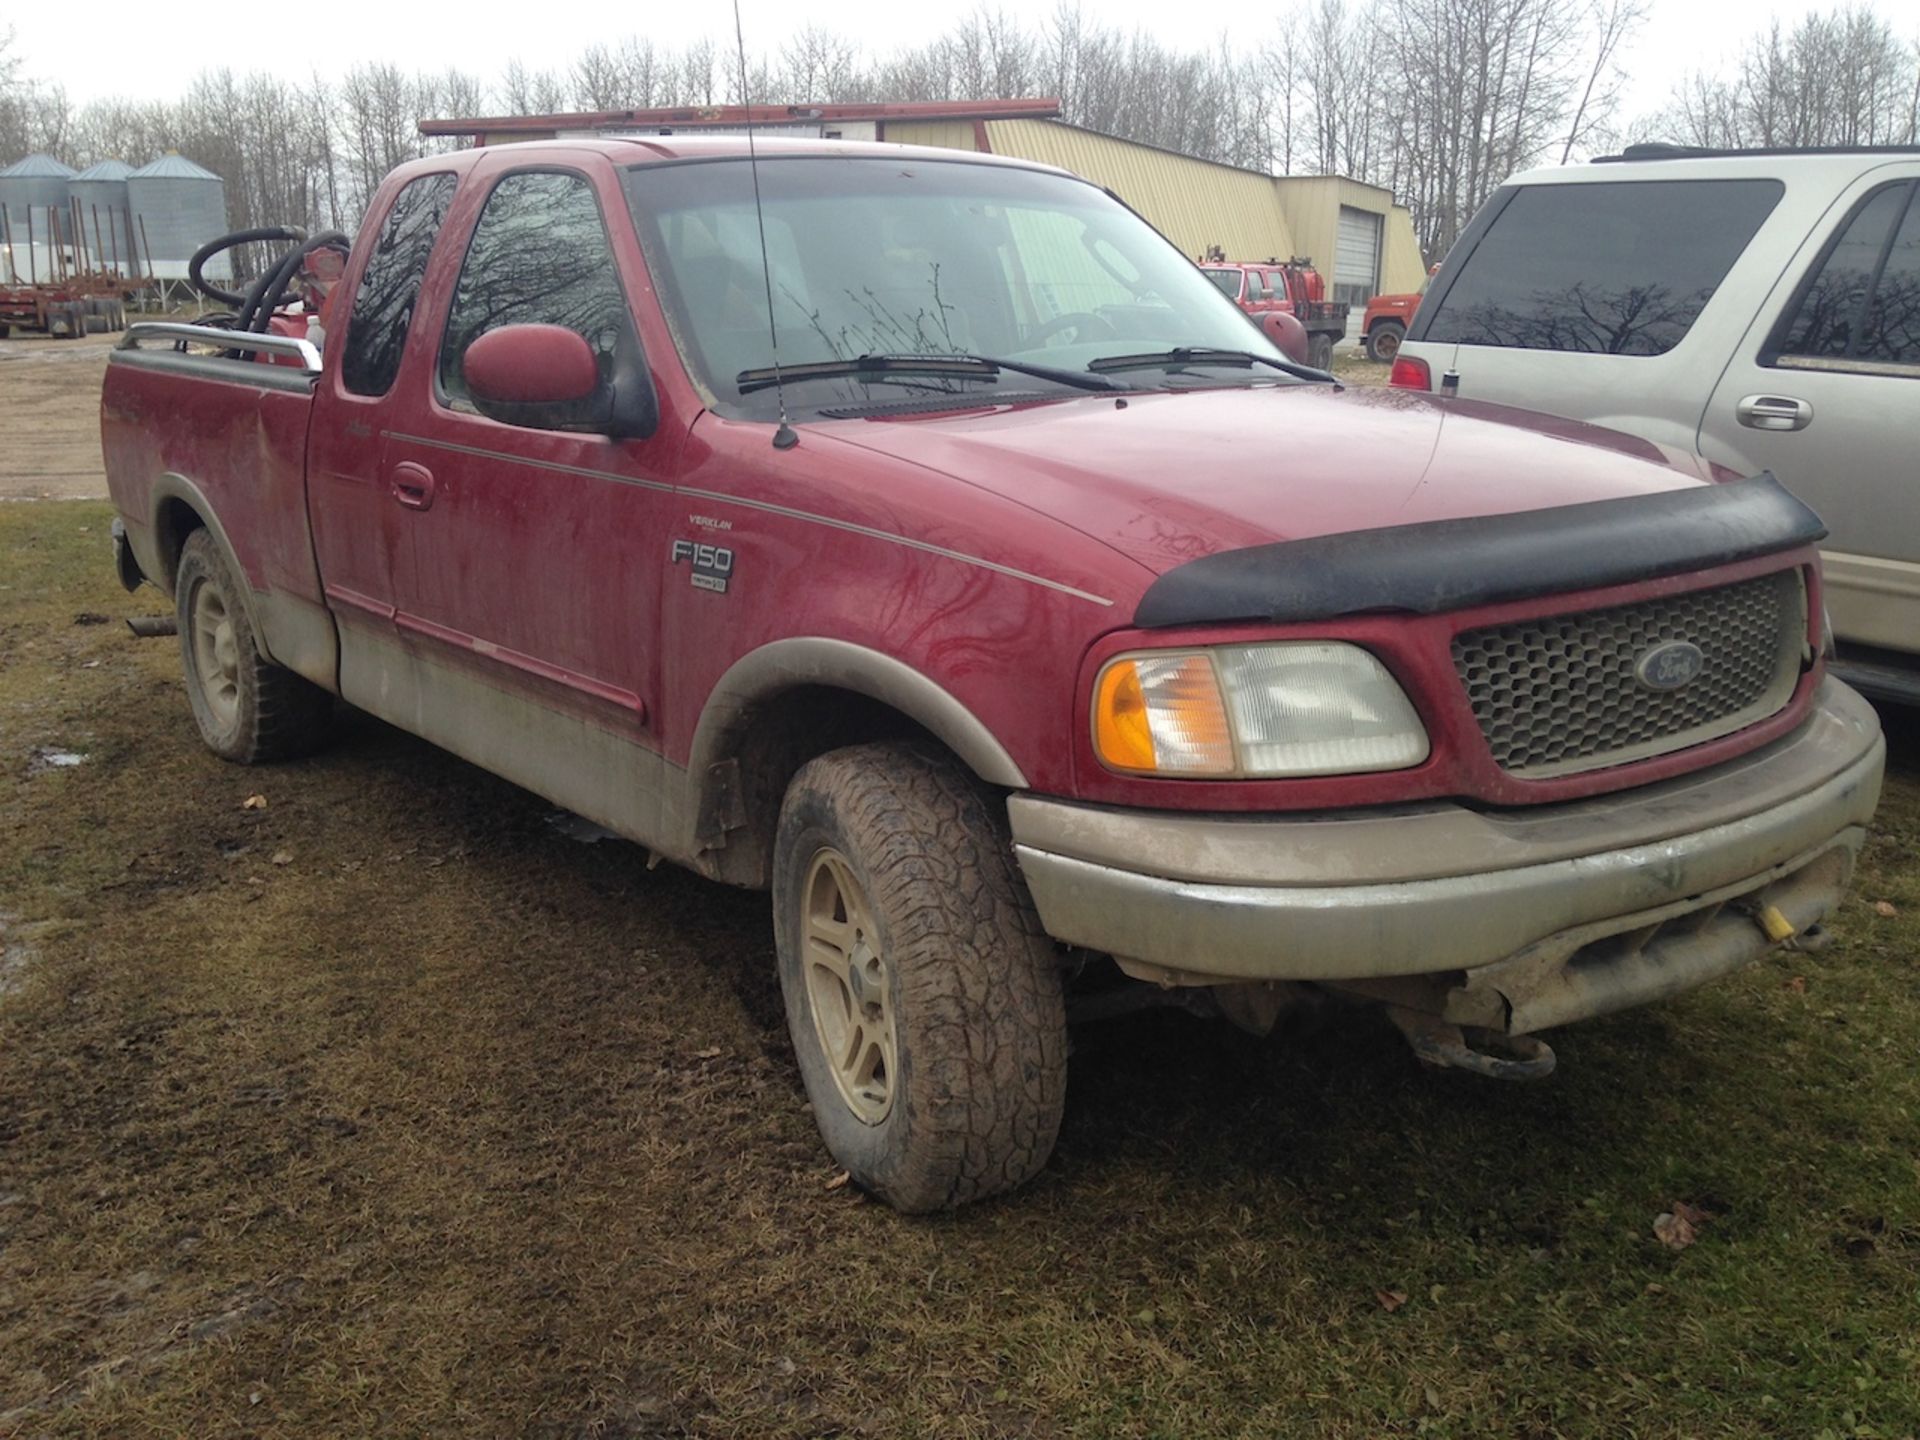 2002 Ford F150 Lariet - Image 6 of 8